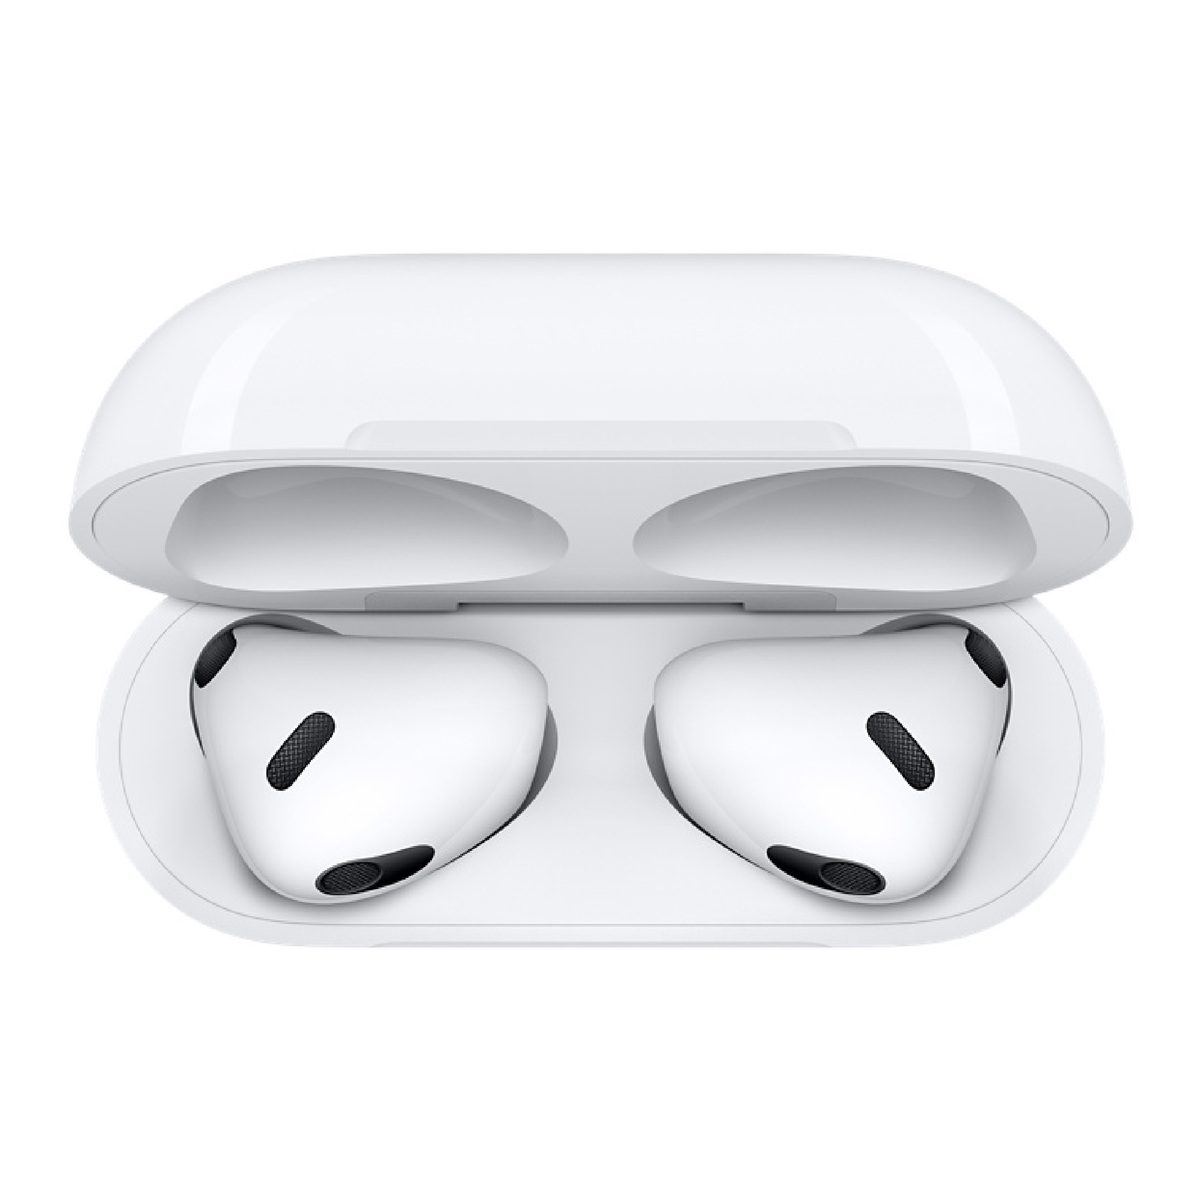 AirPods (3rd generation) with Lightning Charging Case-MPNY3ZE